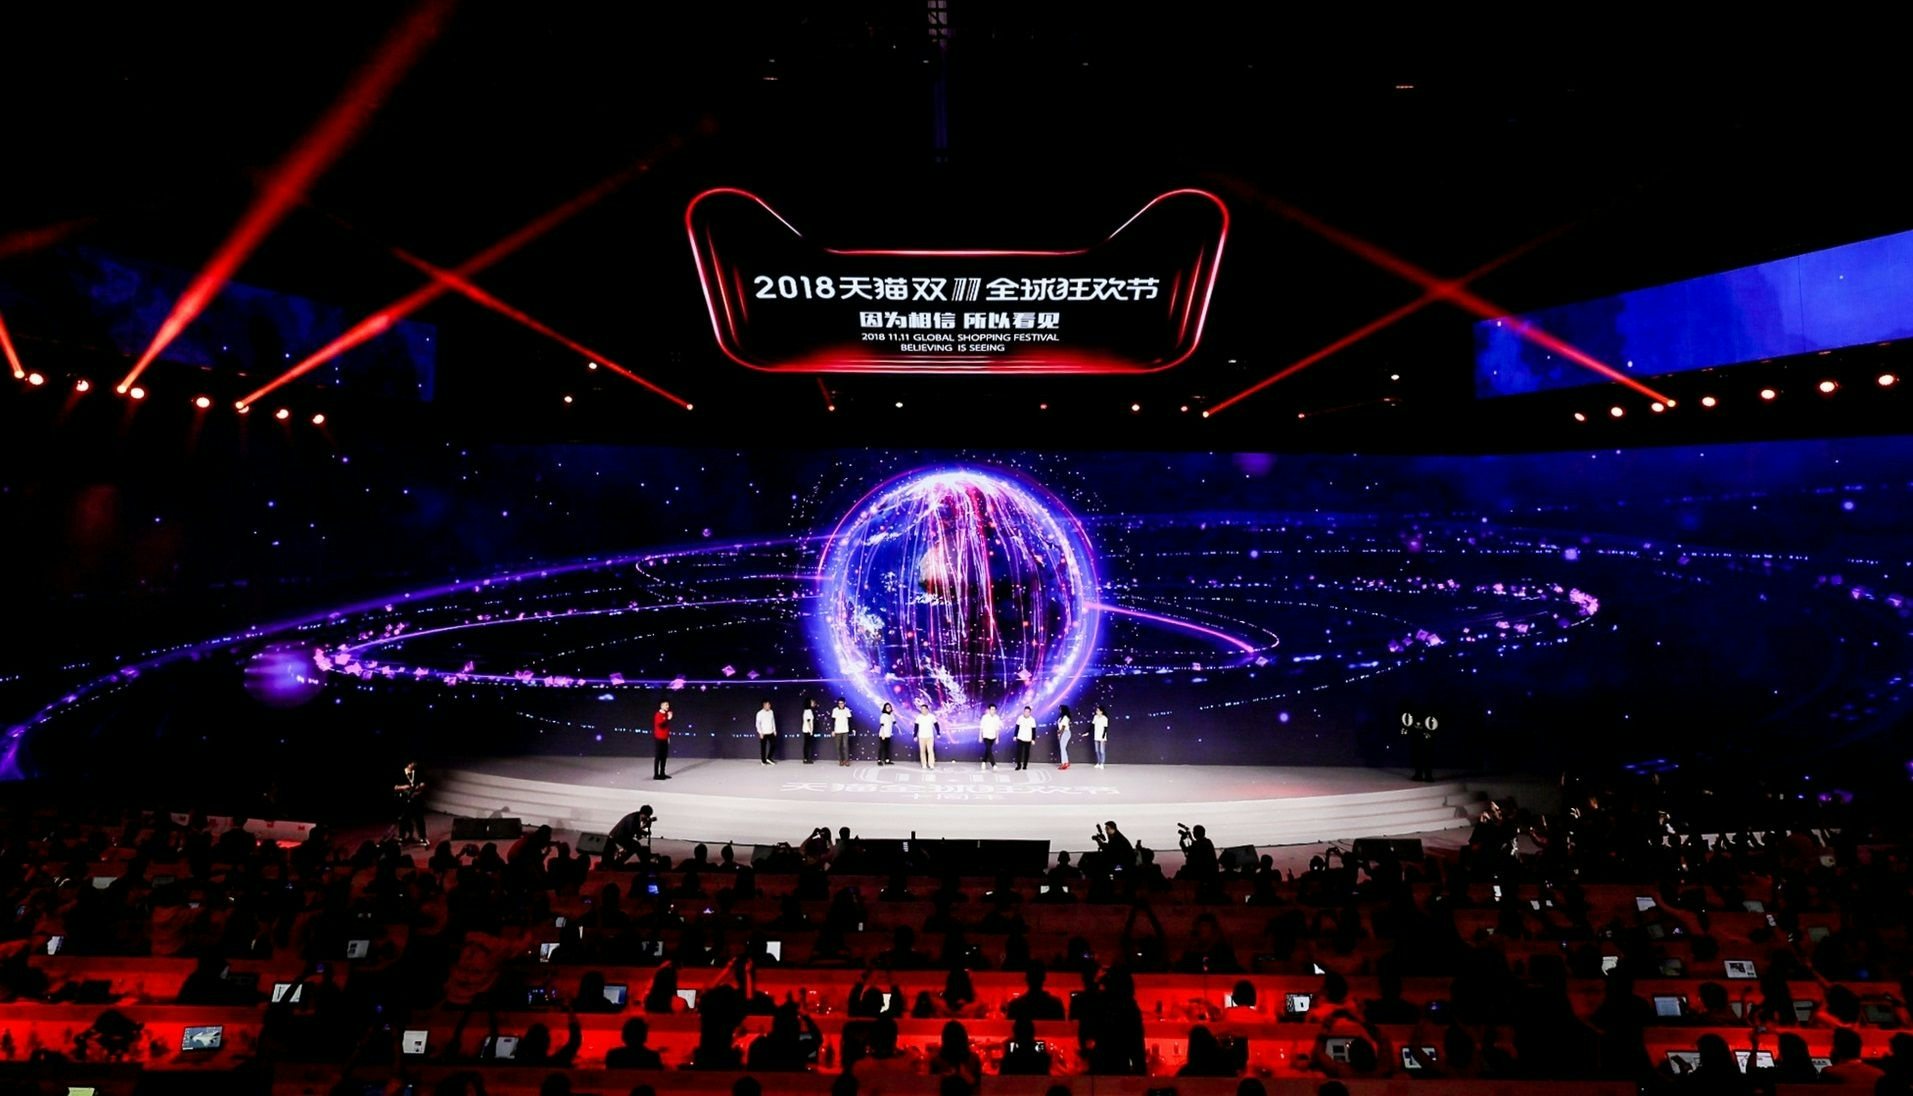 Alibaba released its Q3 2019 earnings on Jan. 30 as it attempted to allay fears that it would be hit by the slowing Chinese economy and US-China trade war. Photo: Shutterstock